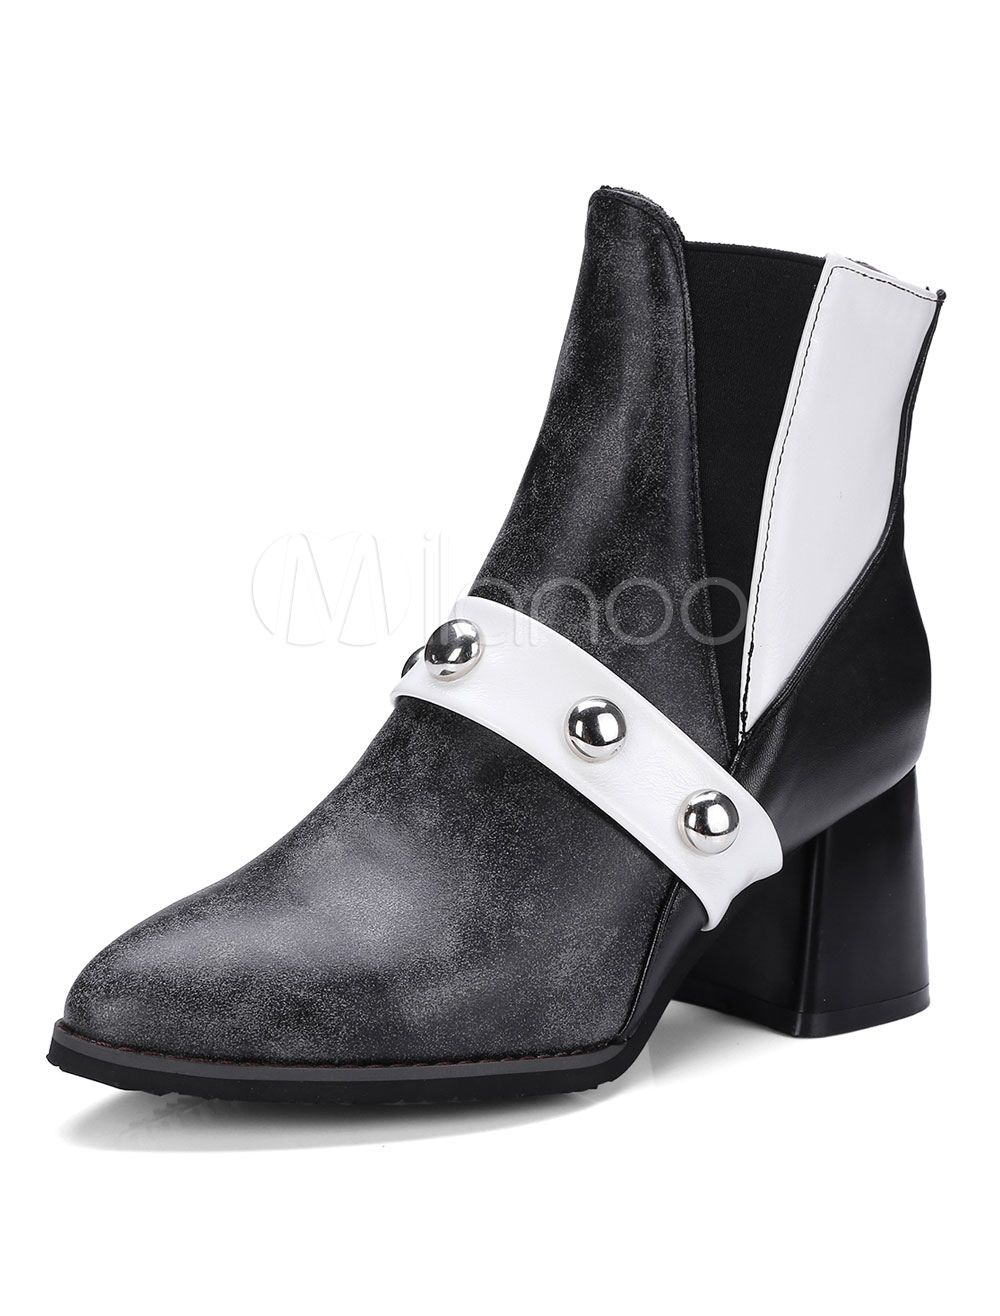 Black Ankle Boots Round Toe Rivets Booties Women Shoes | Milanoo